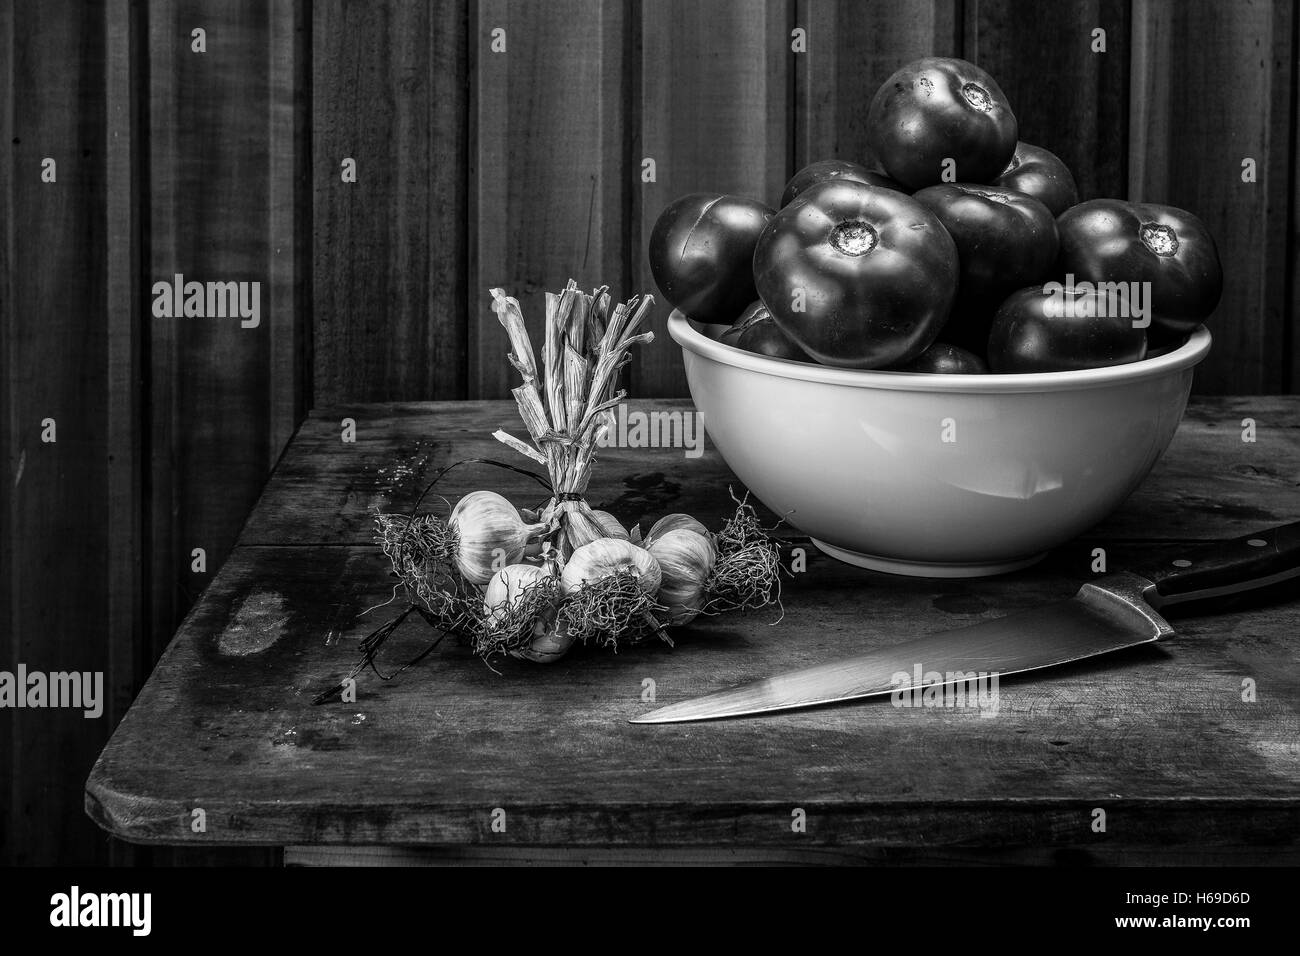 Still life in black and white  with tomatoes on white bowl with a bunch of garlic and a knife on a rustic wooden table. Stock Photo